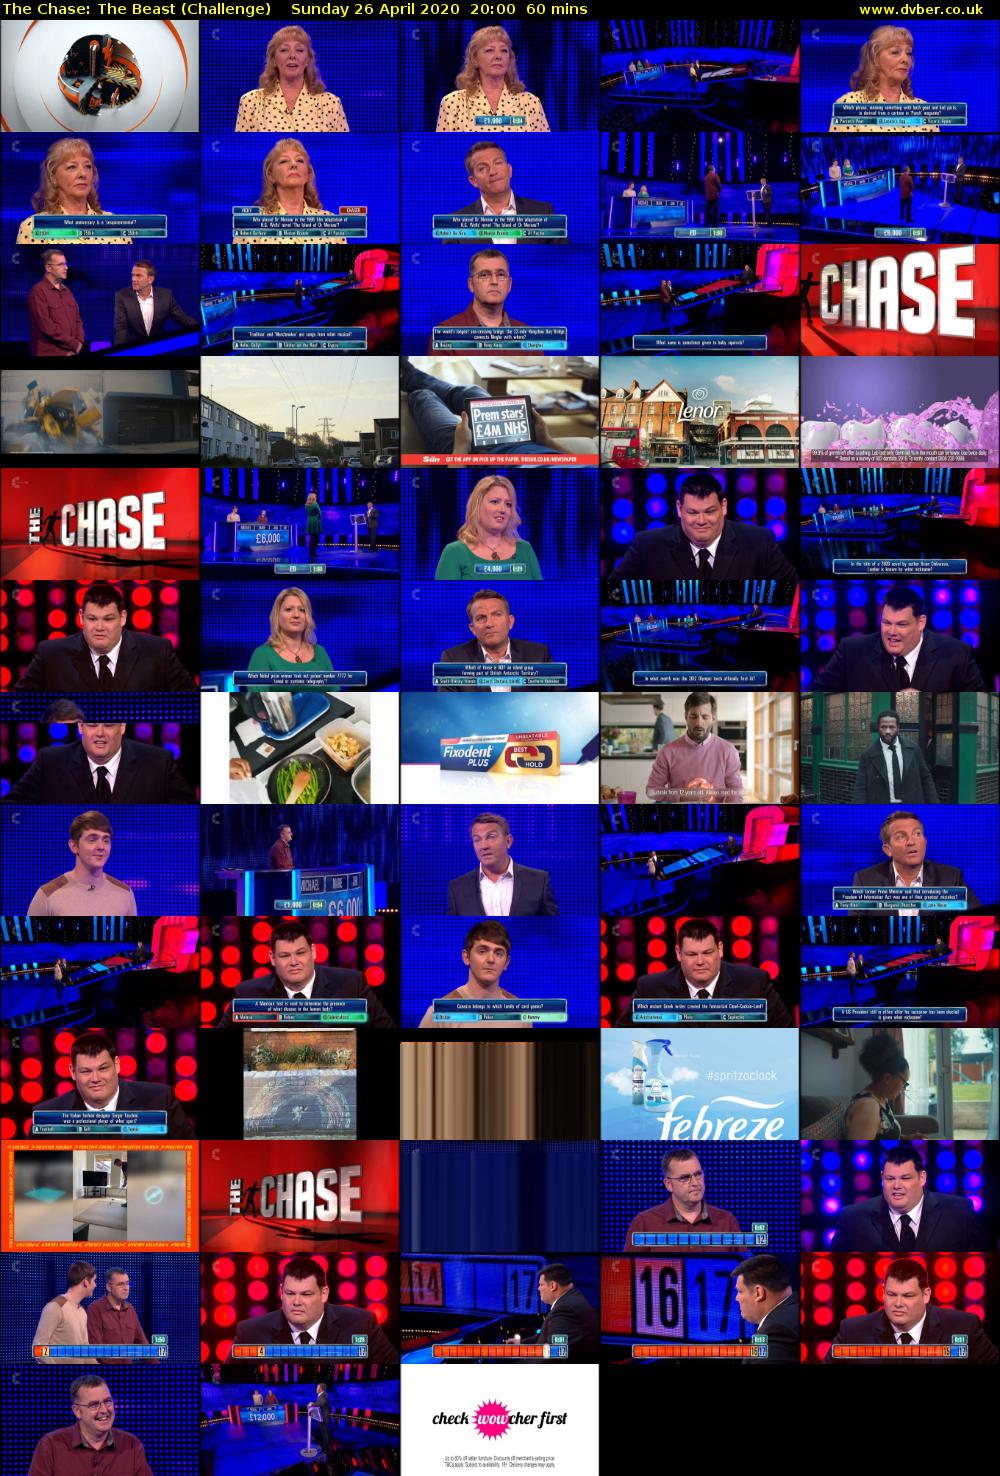 The Chase: The Beast (Challenge) Sunday 26 April 2020 20:00 - 21:00